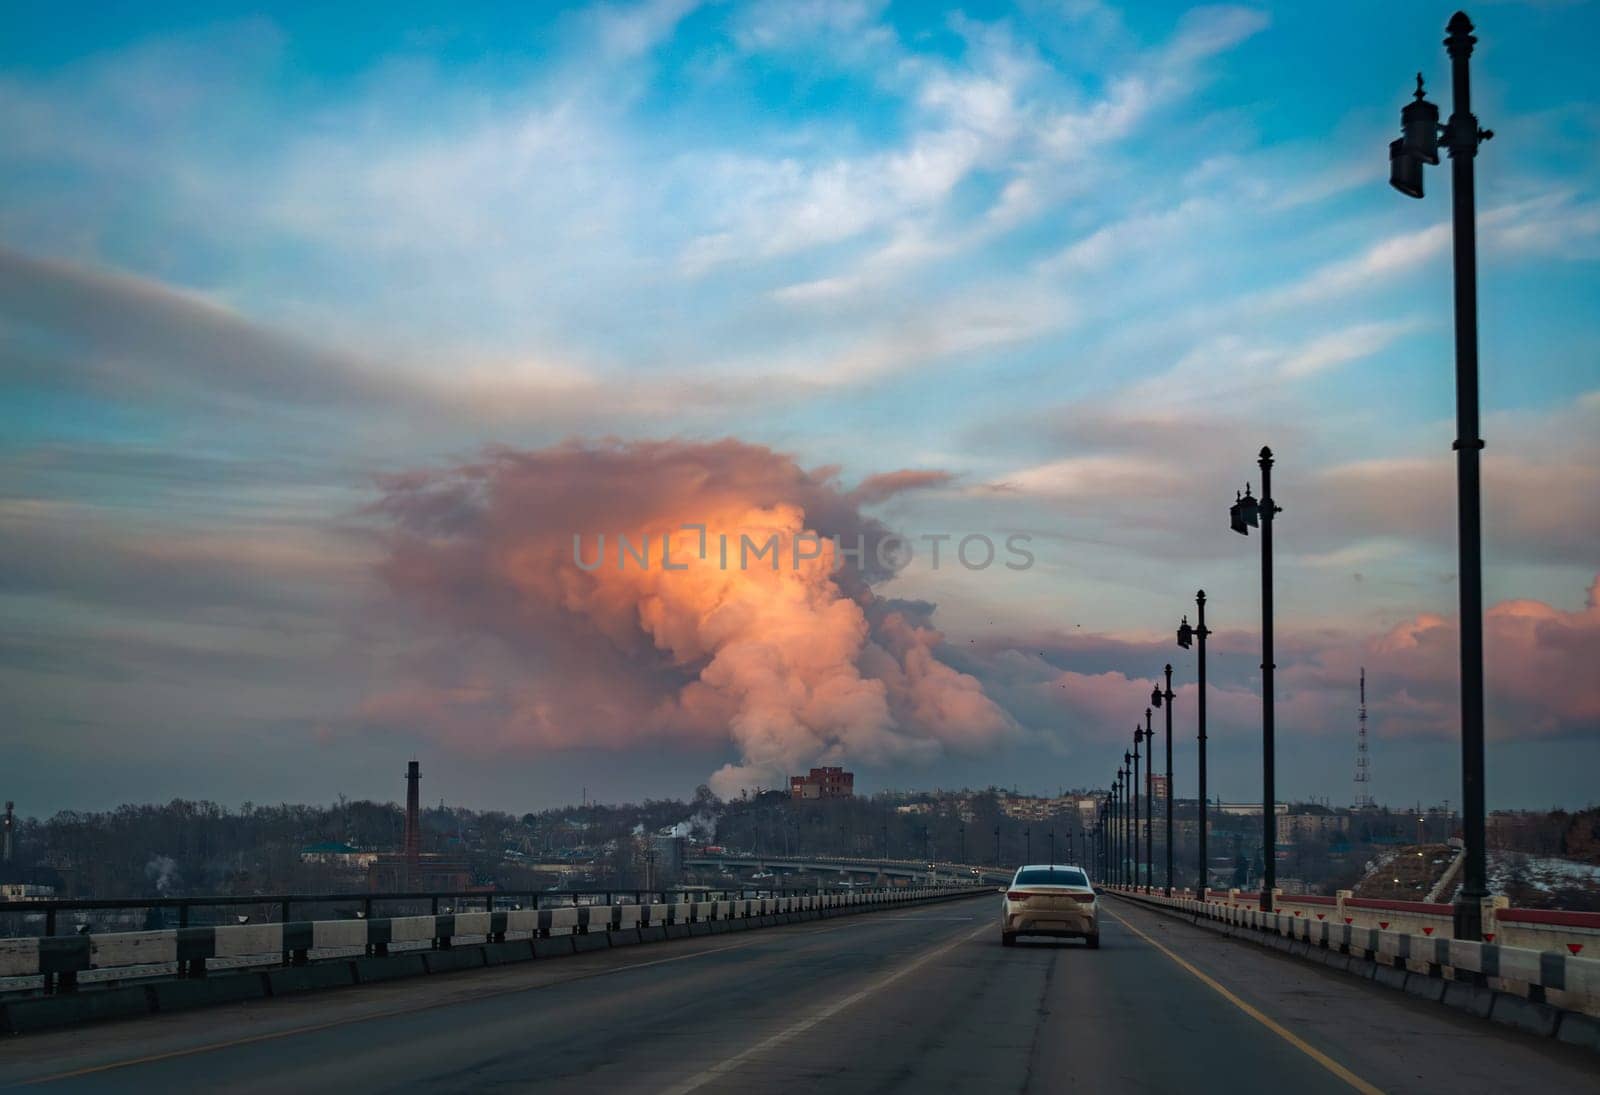 A car is driving across a bridge during sunset, with vibrant clouds and smoke rising in the distance, indicating industrial activity.